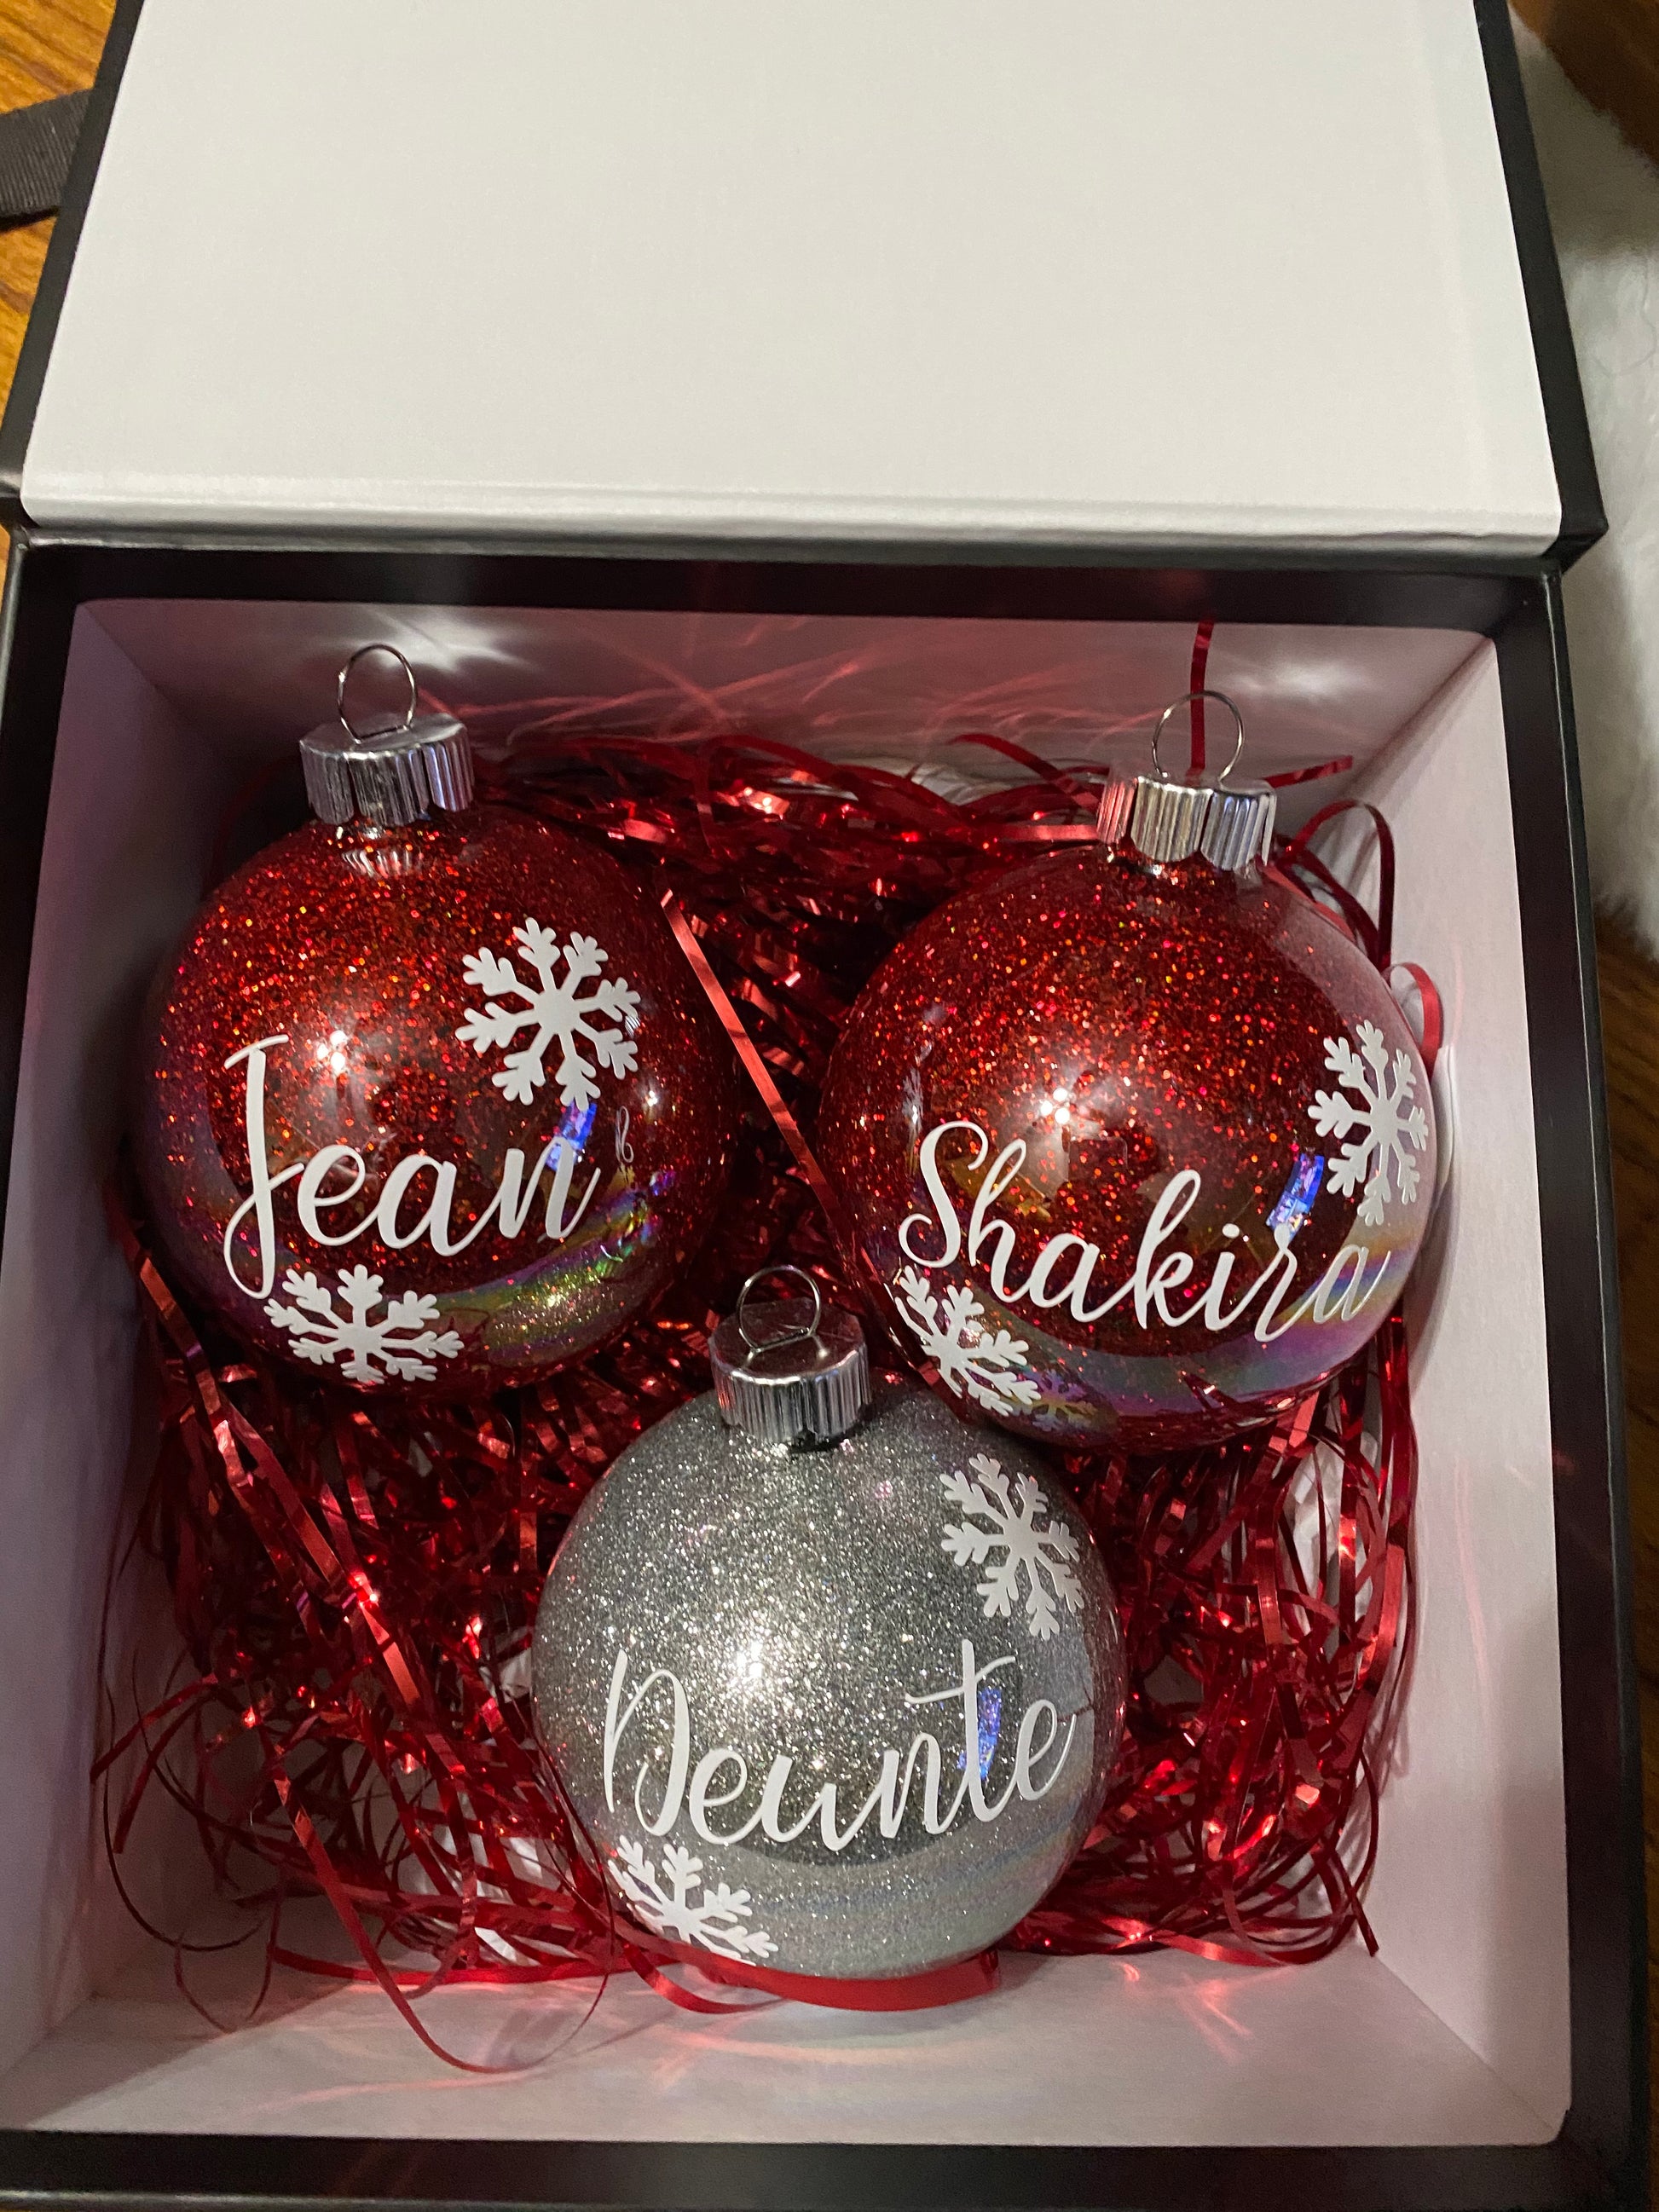 Christmas Balls Personalized Names